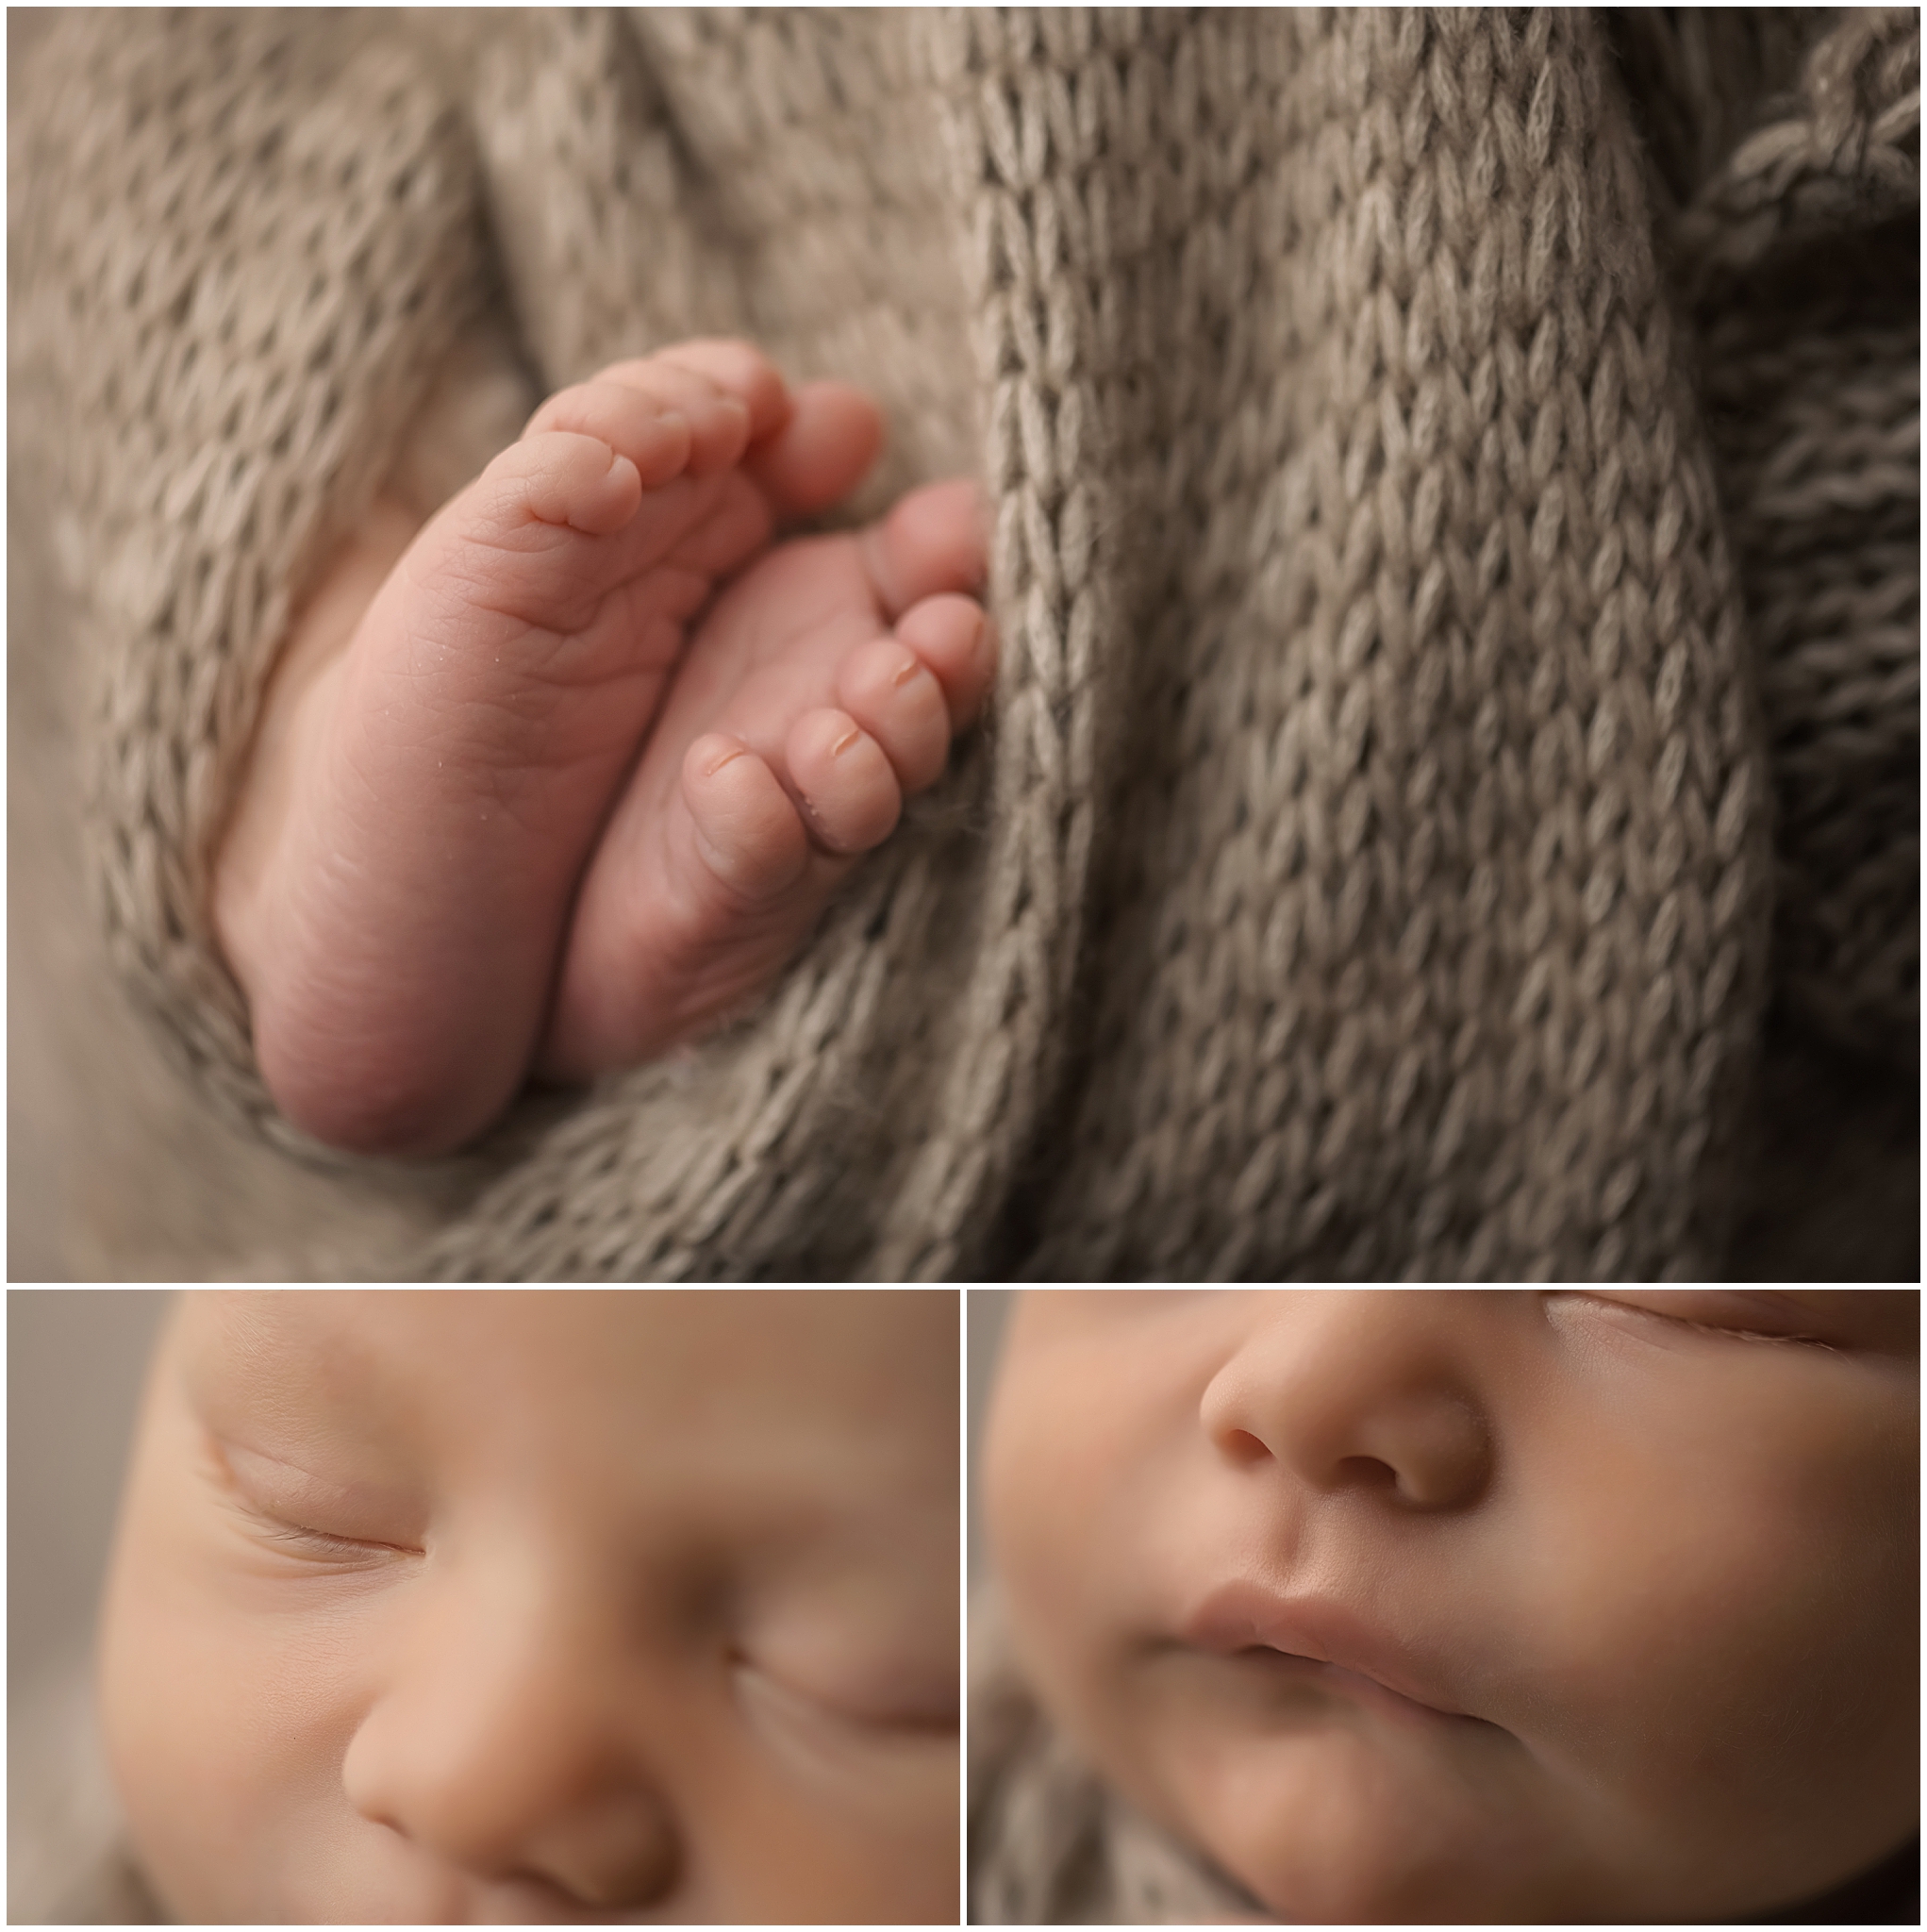 details of baby's face and toes